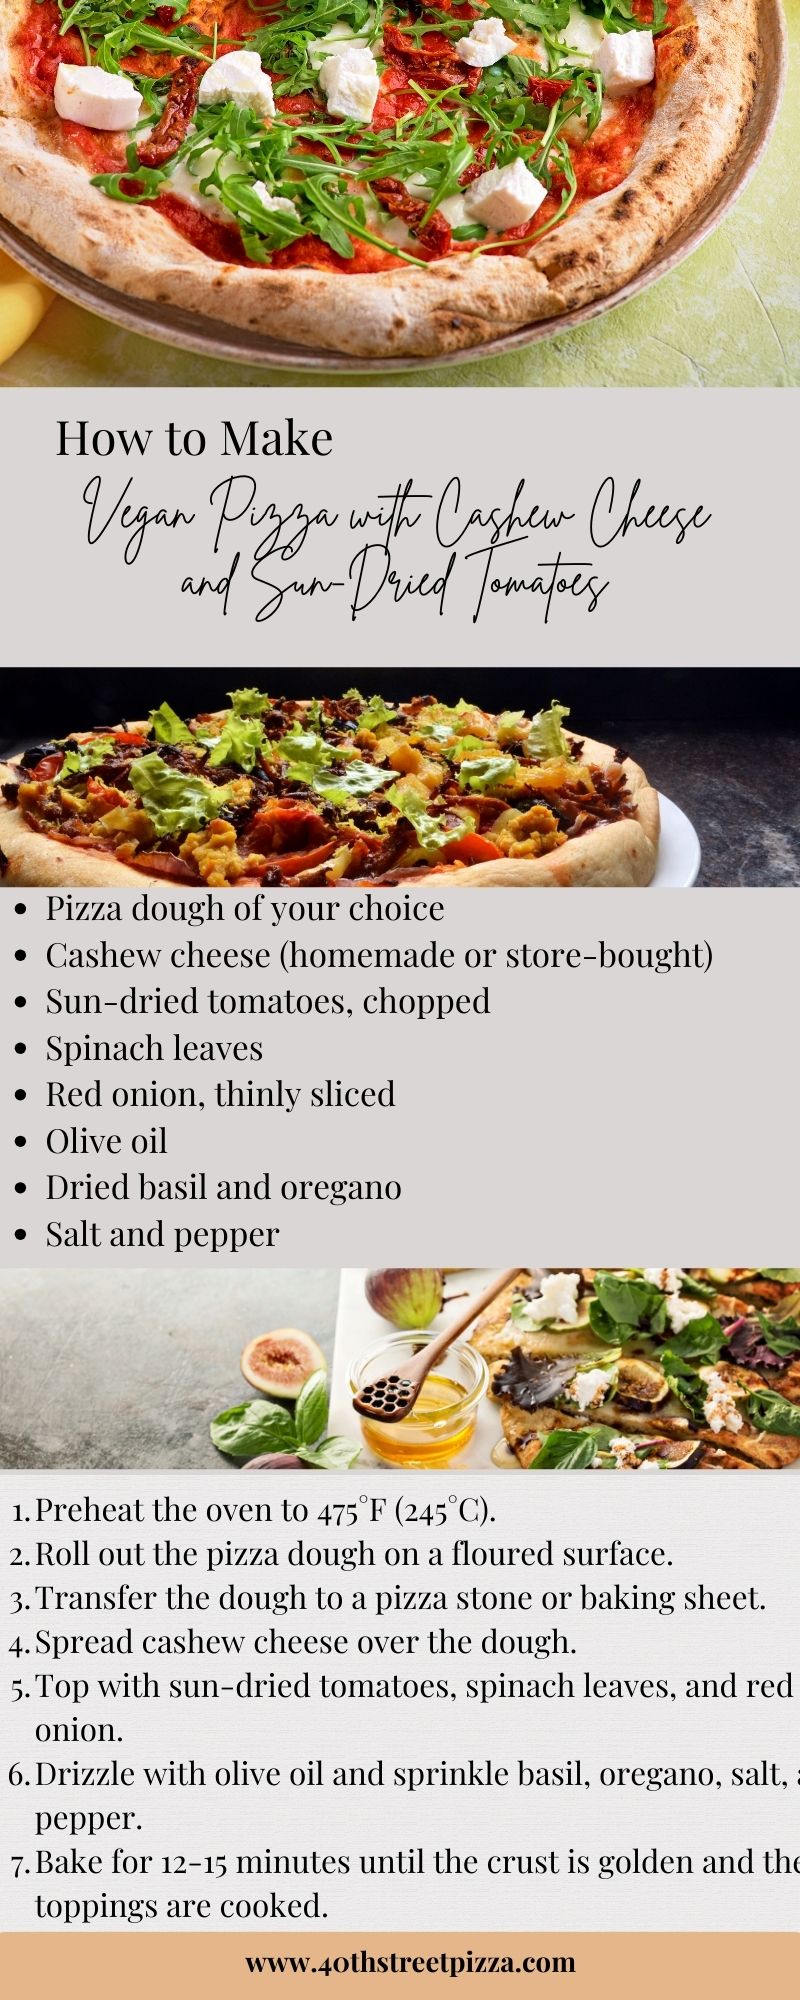 Vegan Pizza with Cashew Cheese and Sun-Dried Tomatoes infographic